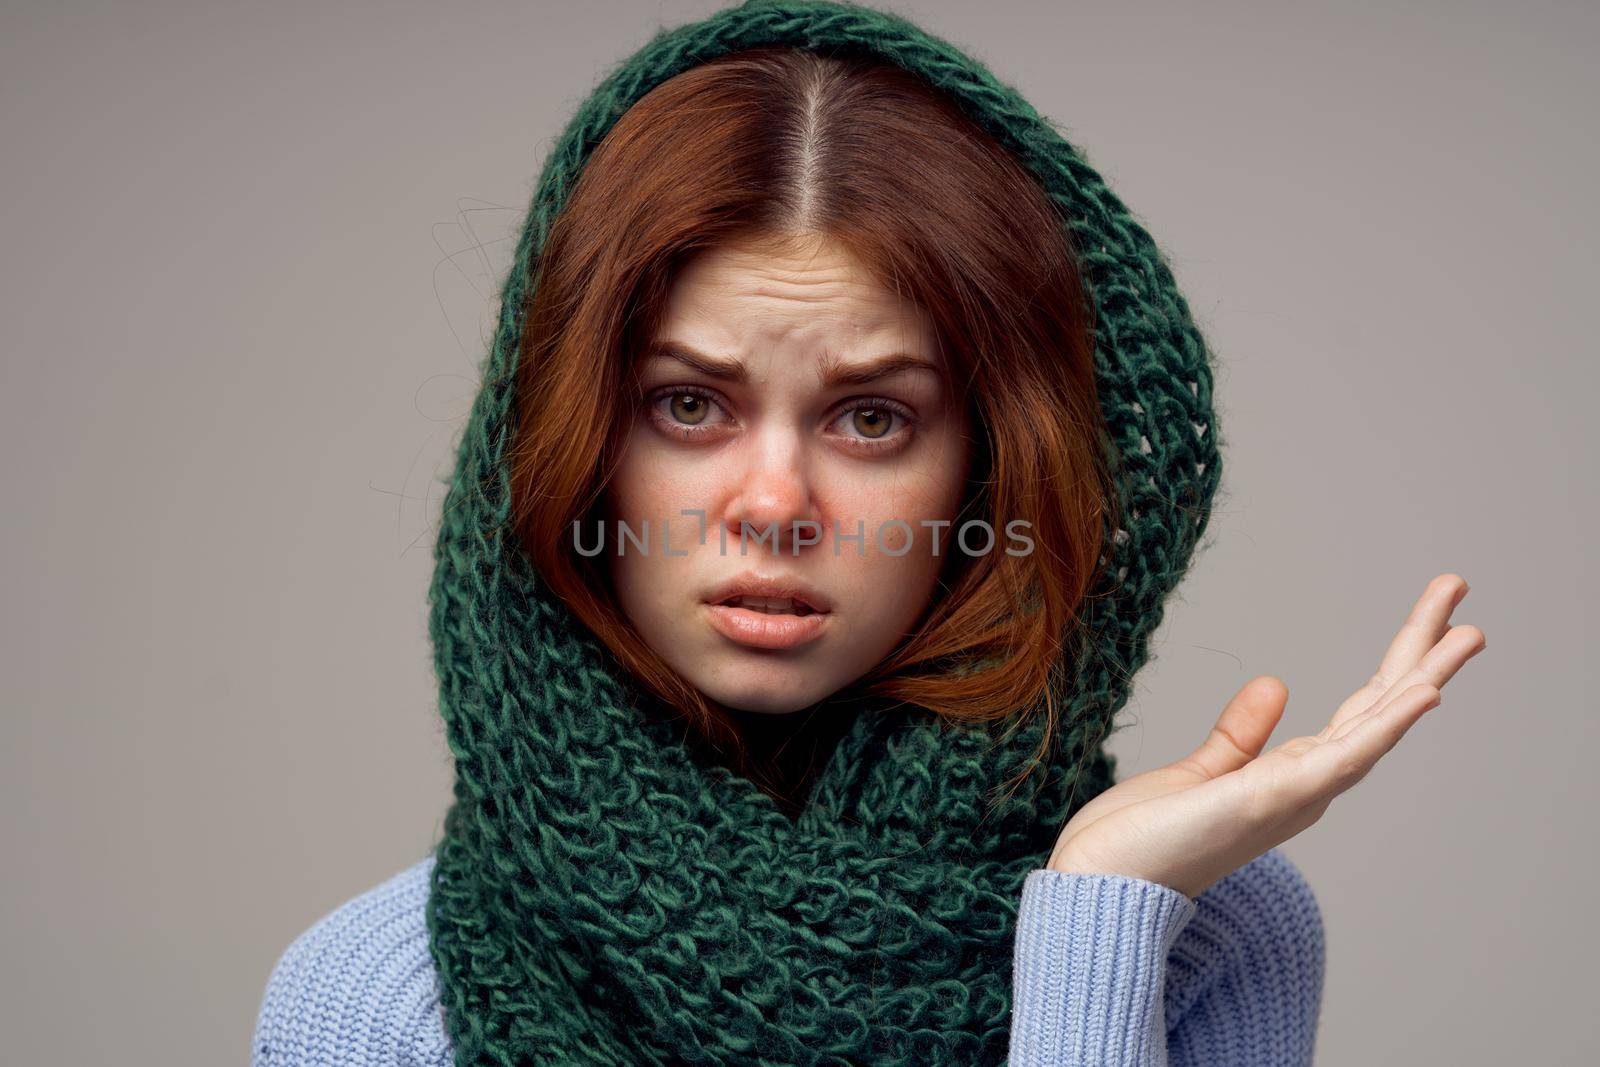 woman health problems temperature light background by SHOTPRIME